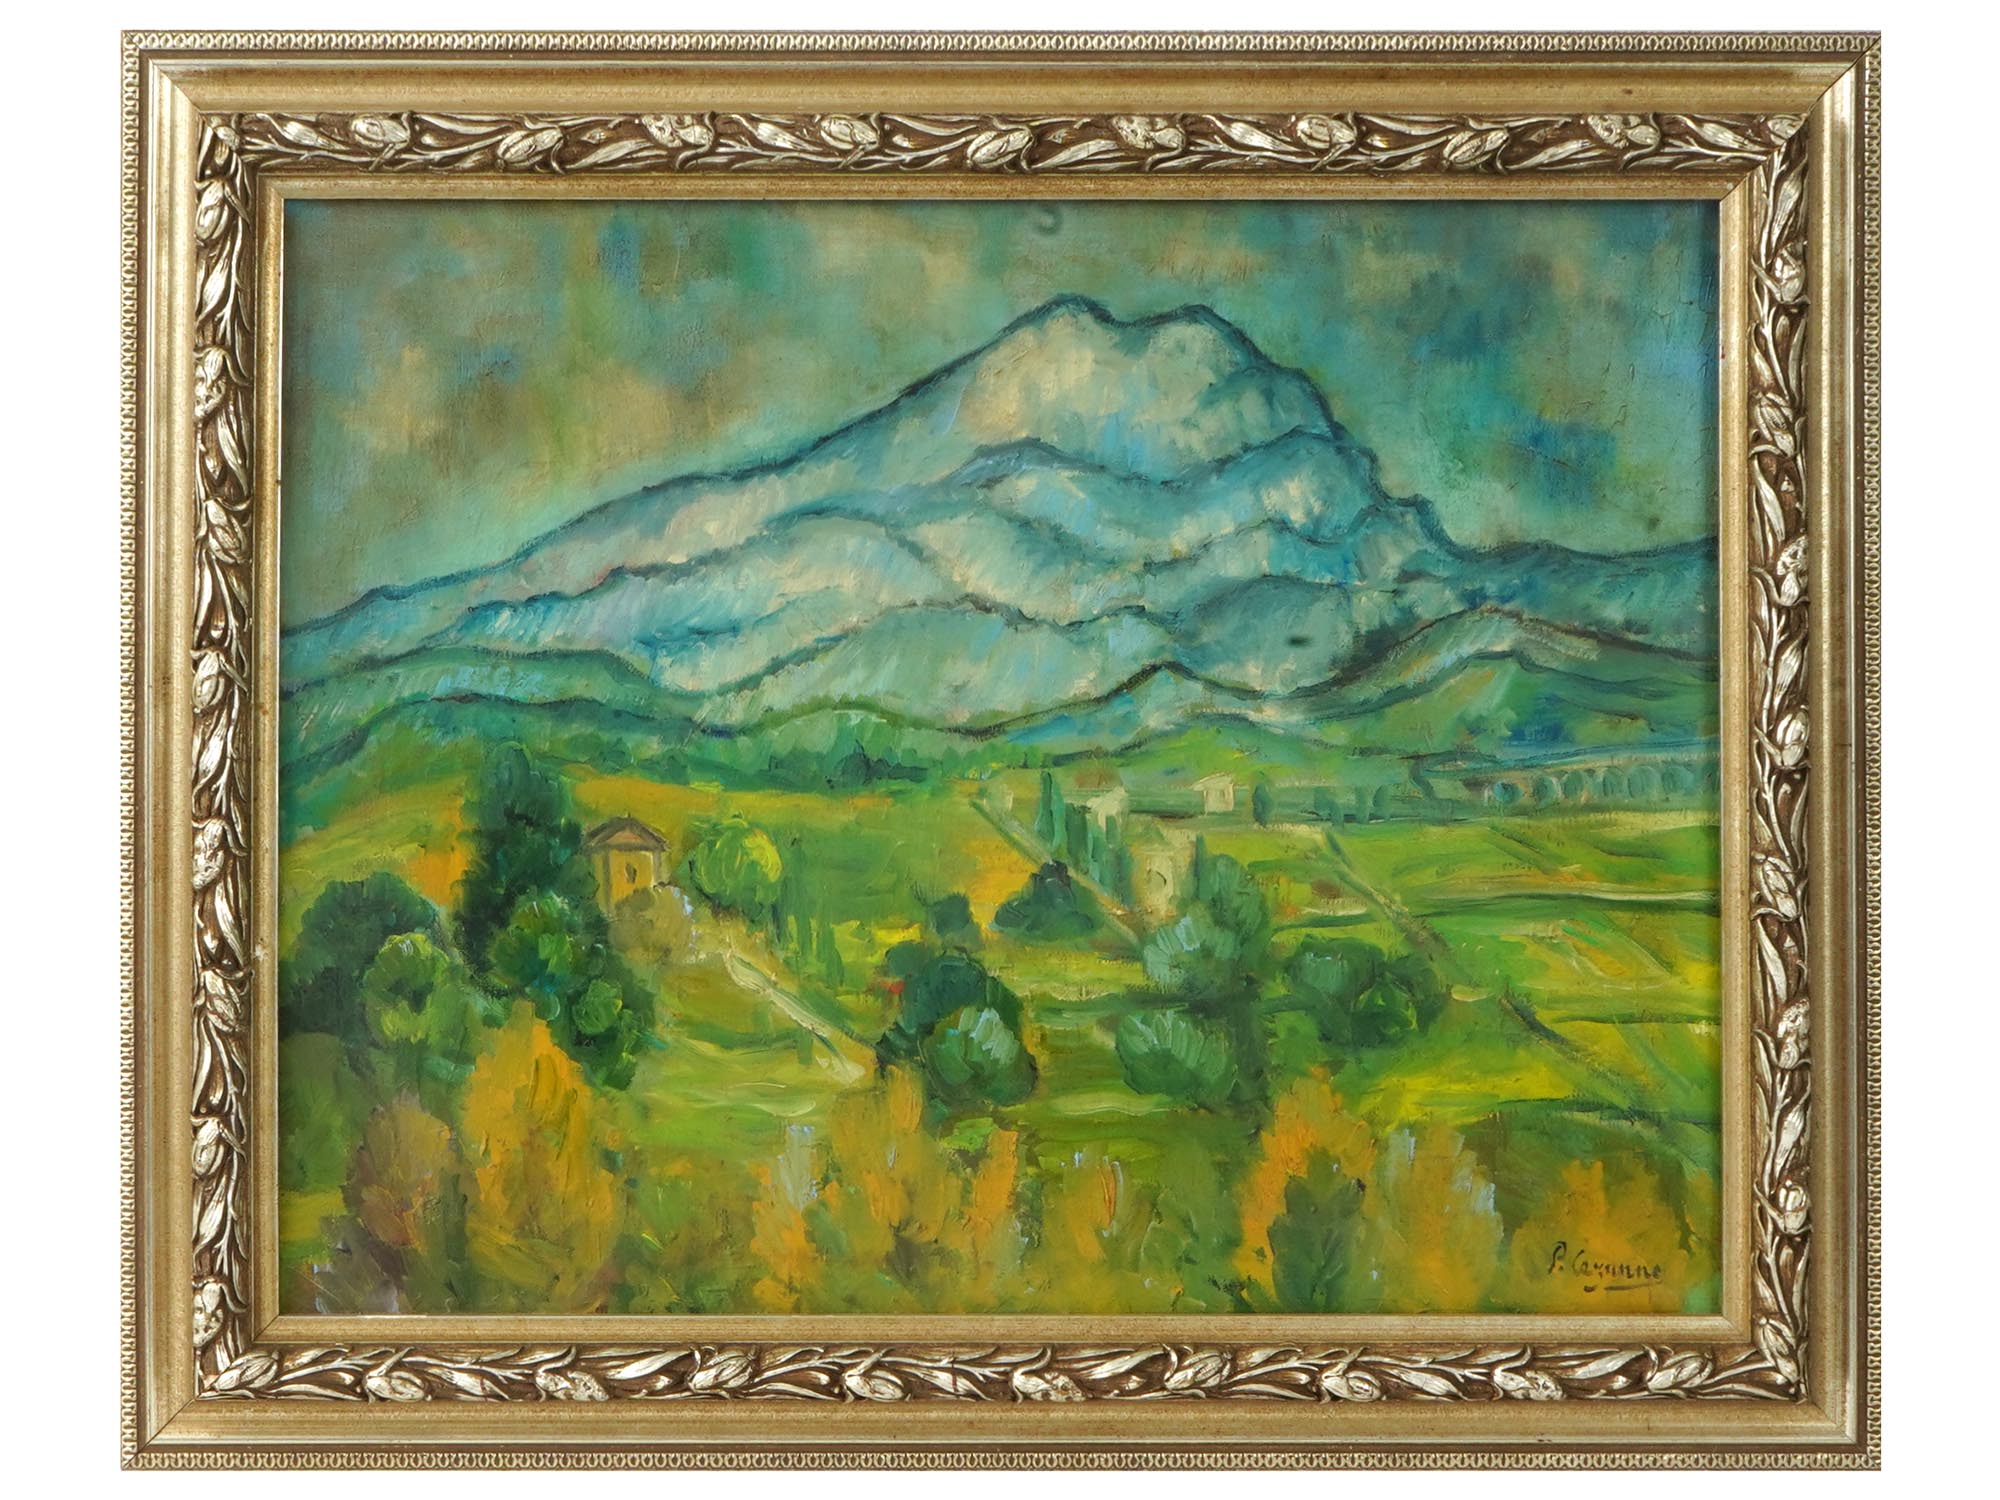 FRENCH LANDSCAPE PAINTING AFTER PAUL CEZANNE PIC-0